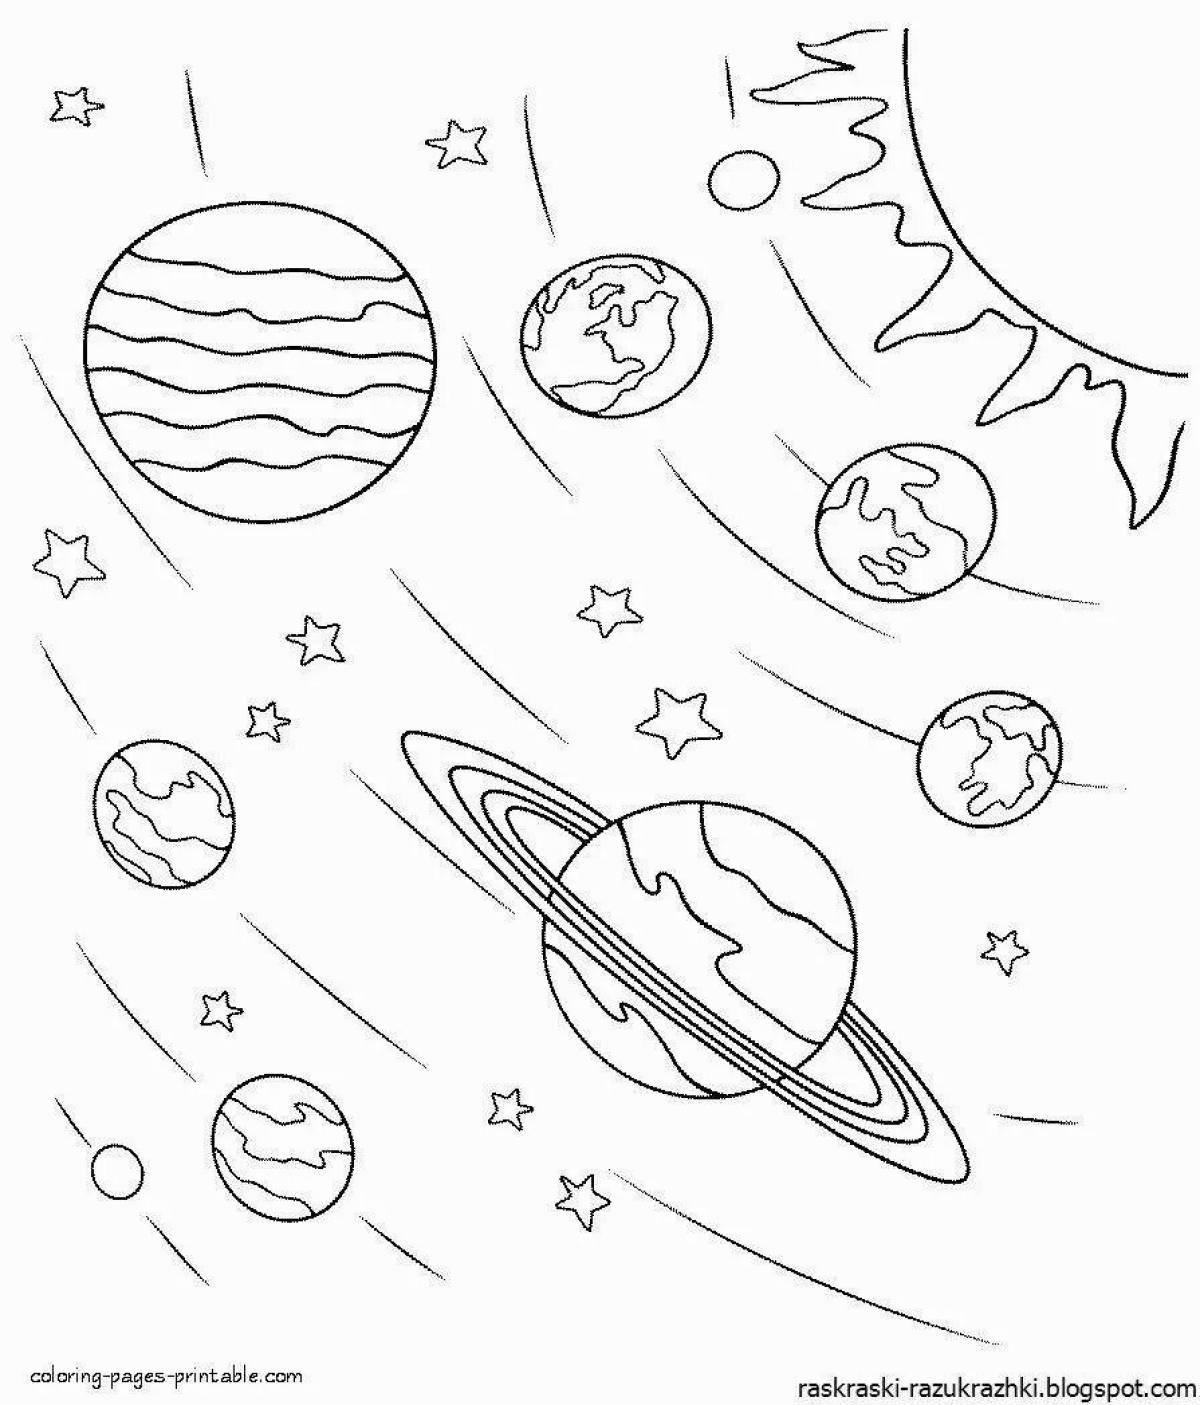 Brilliantly colored universe coloring page